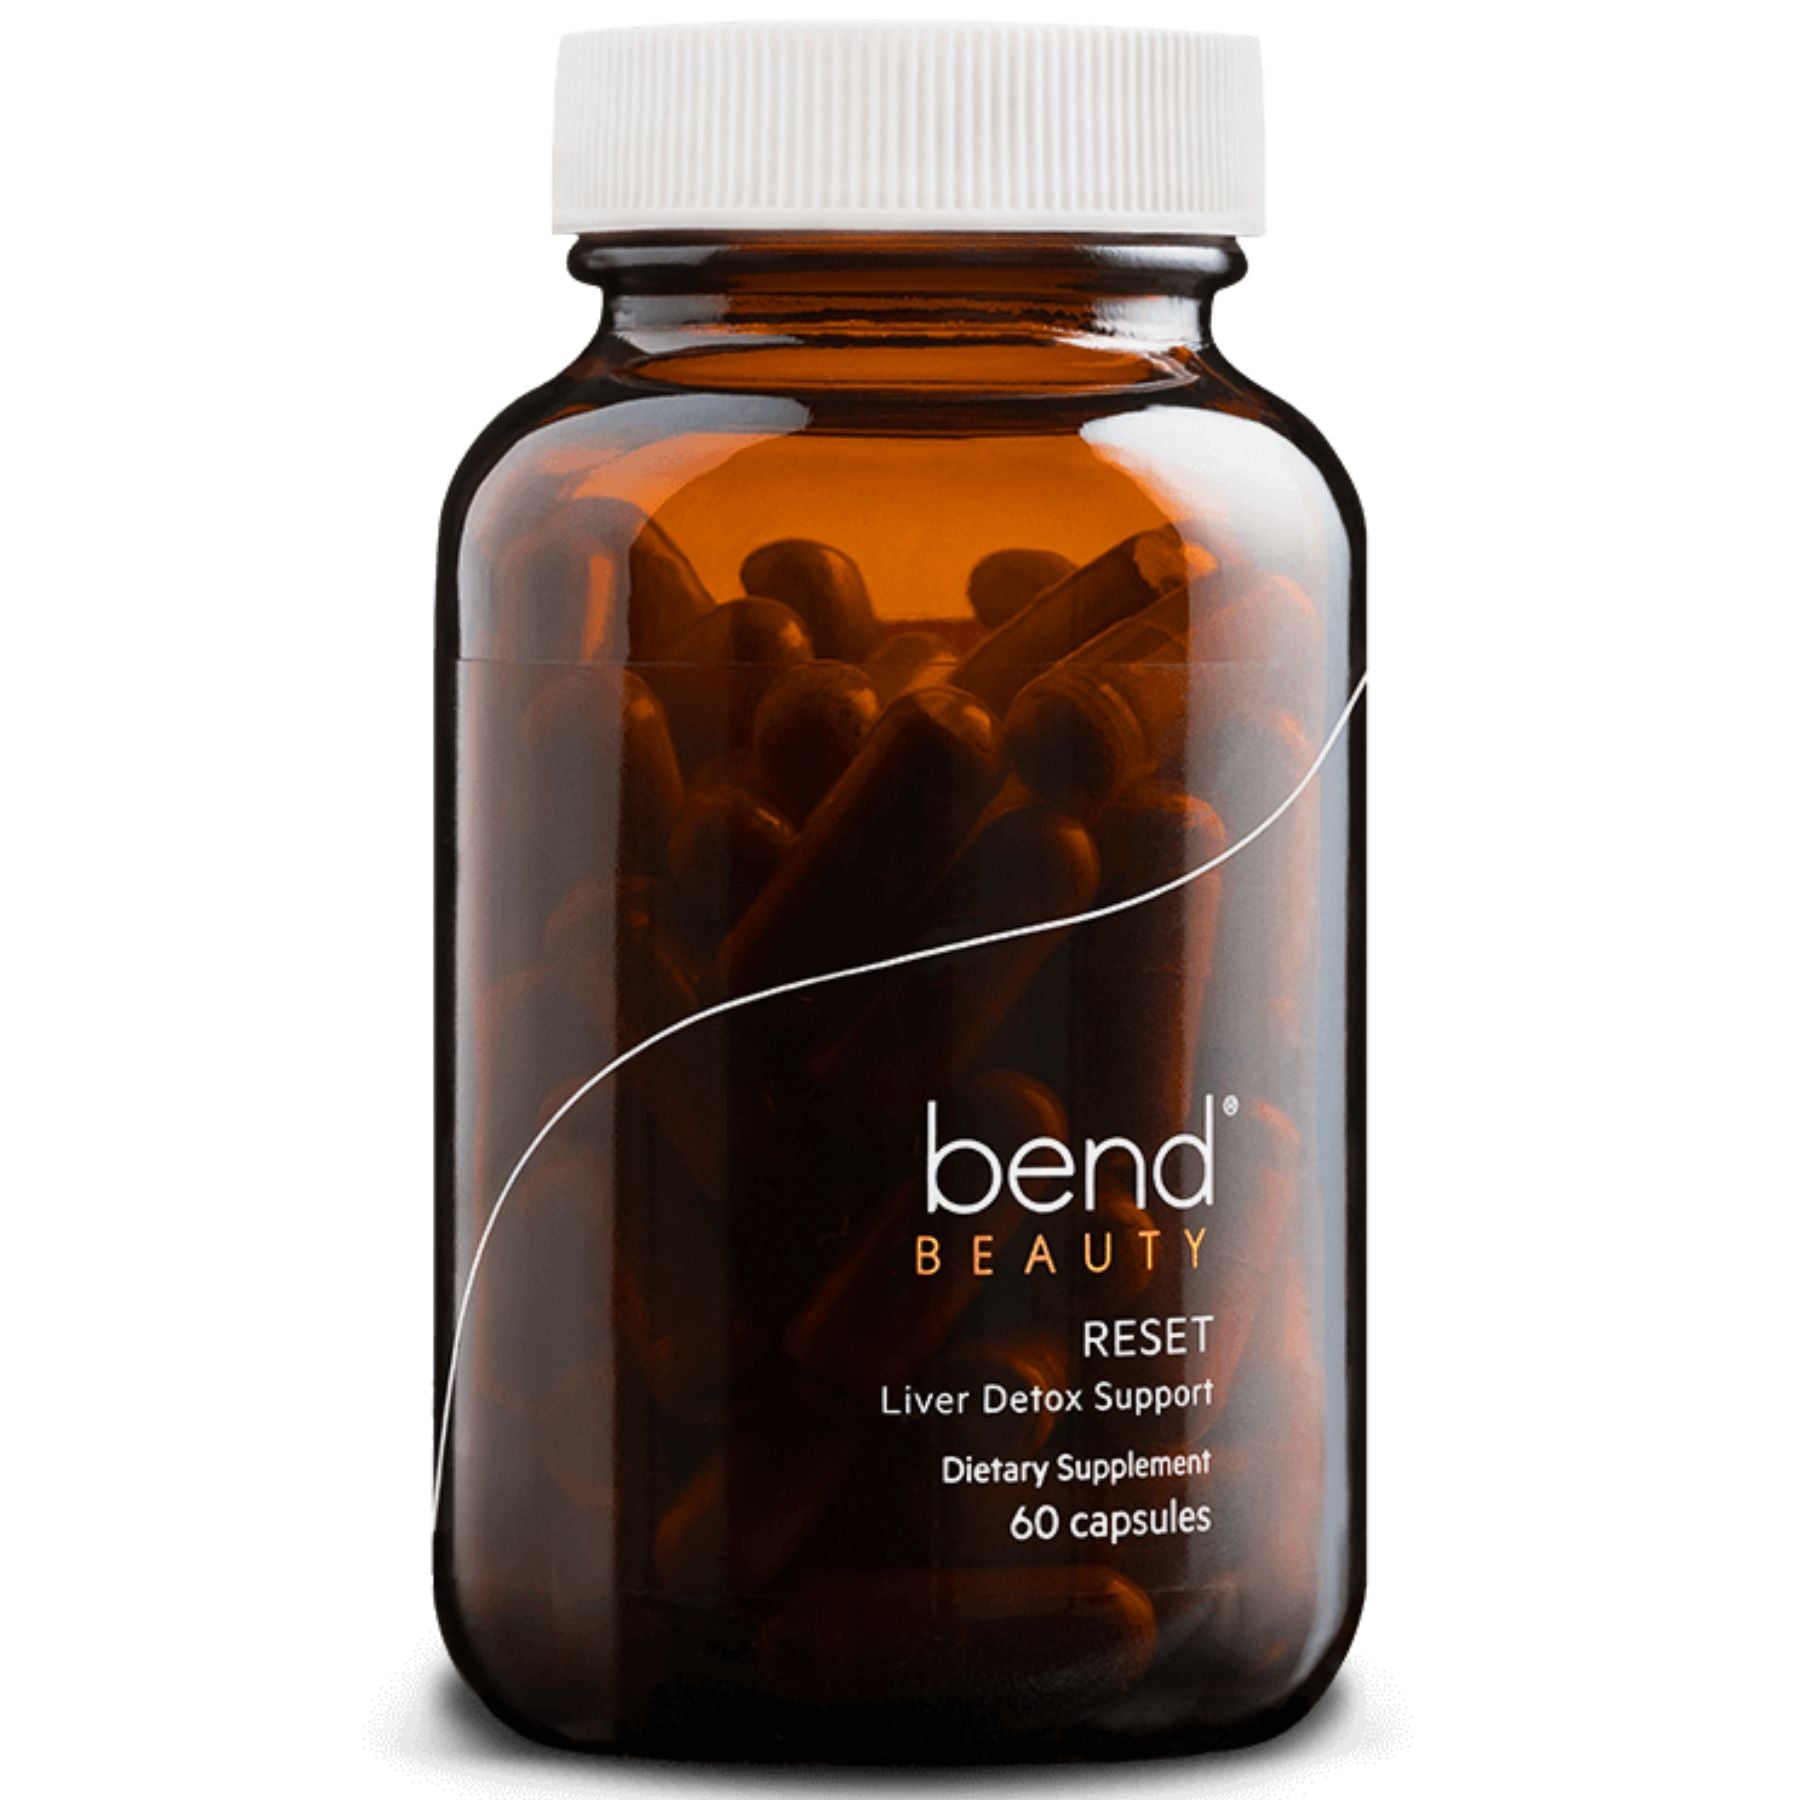 Image of Bend Beauty Reset 60 capsules, a supplement for liver support and detox, available at Fiddleheads Health and